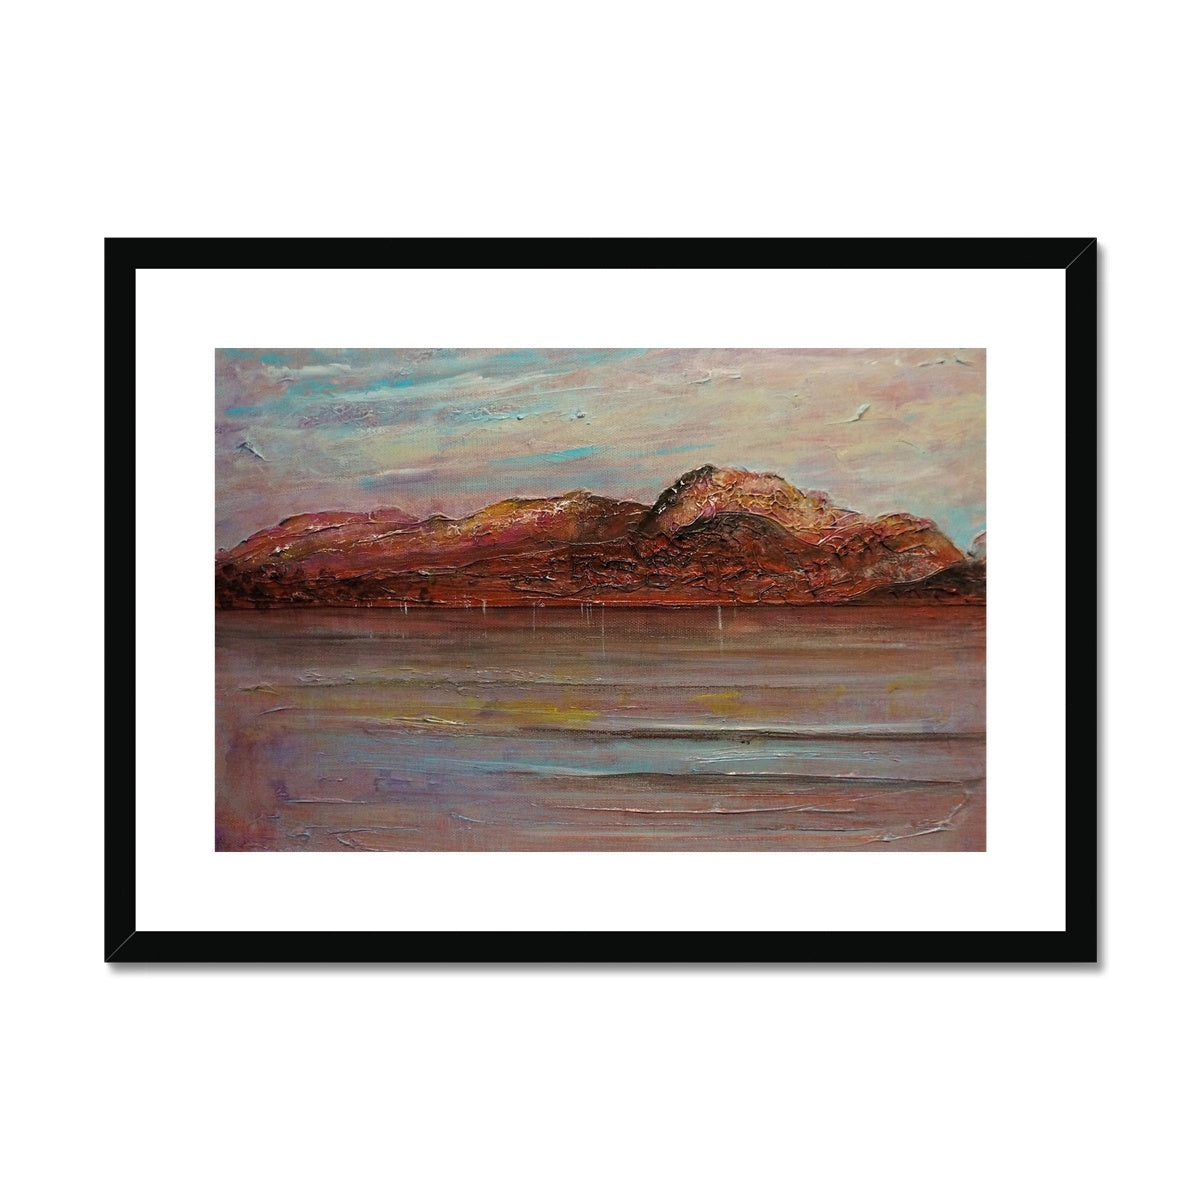 Ben Nevis Painting | Framed & Mounted Prints From Scotland-Framed & Mounted Prints-Scottish Lochs & Mountains Art Gallery-A2 Landscape-Black Frame-Paintings, Prints, Homeware, Art Gifts From Scotland By Scottish Artist Kevin Hunter